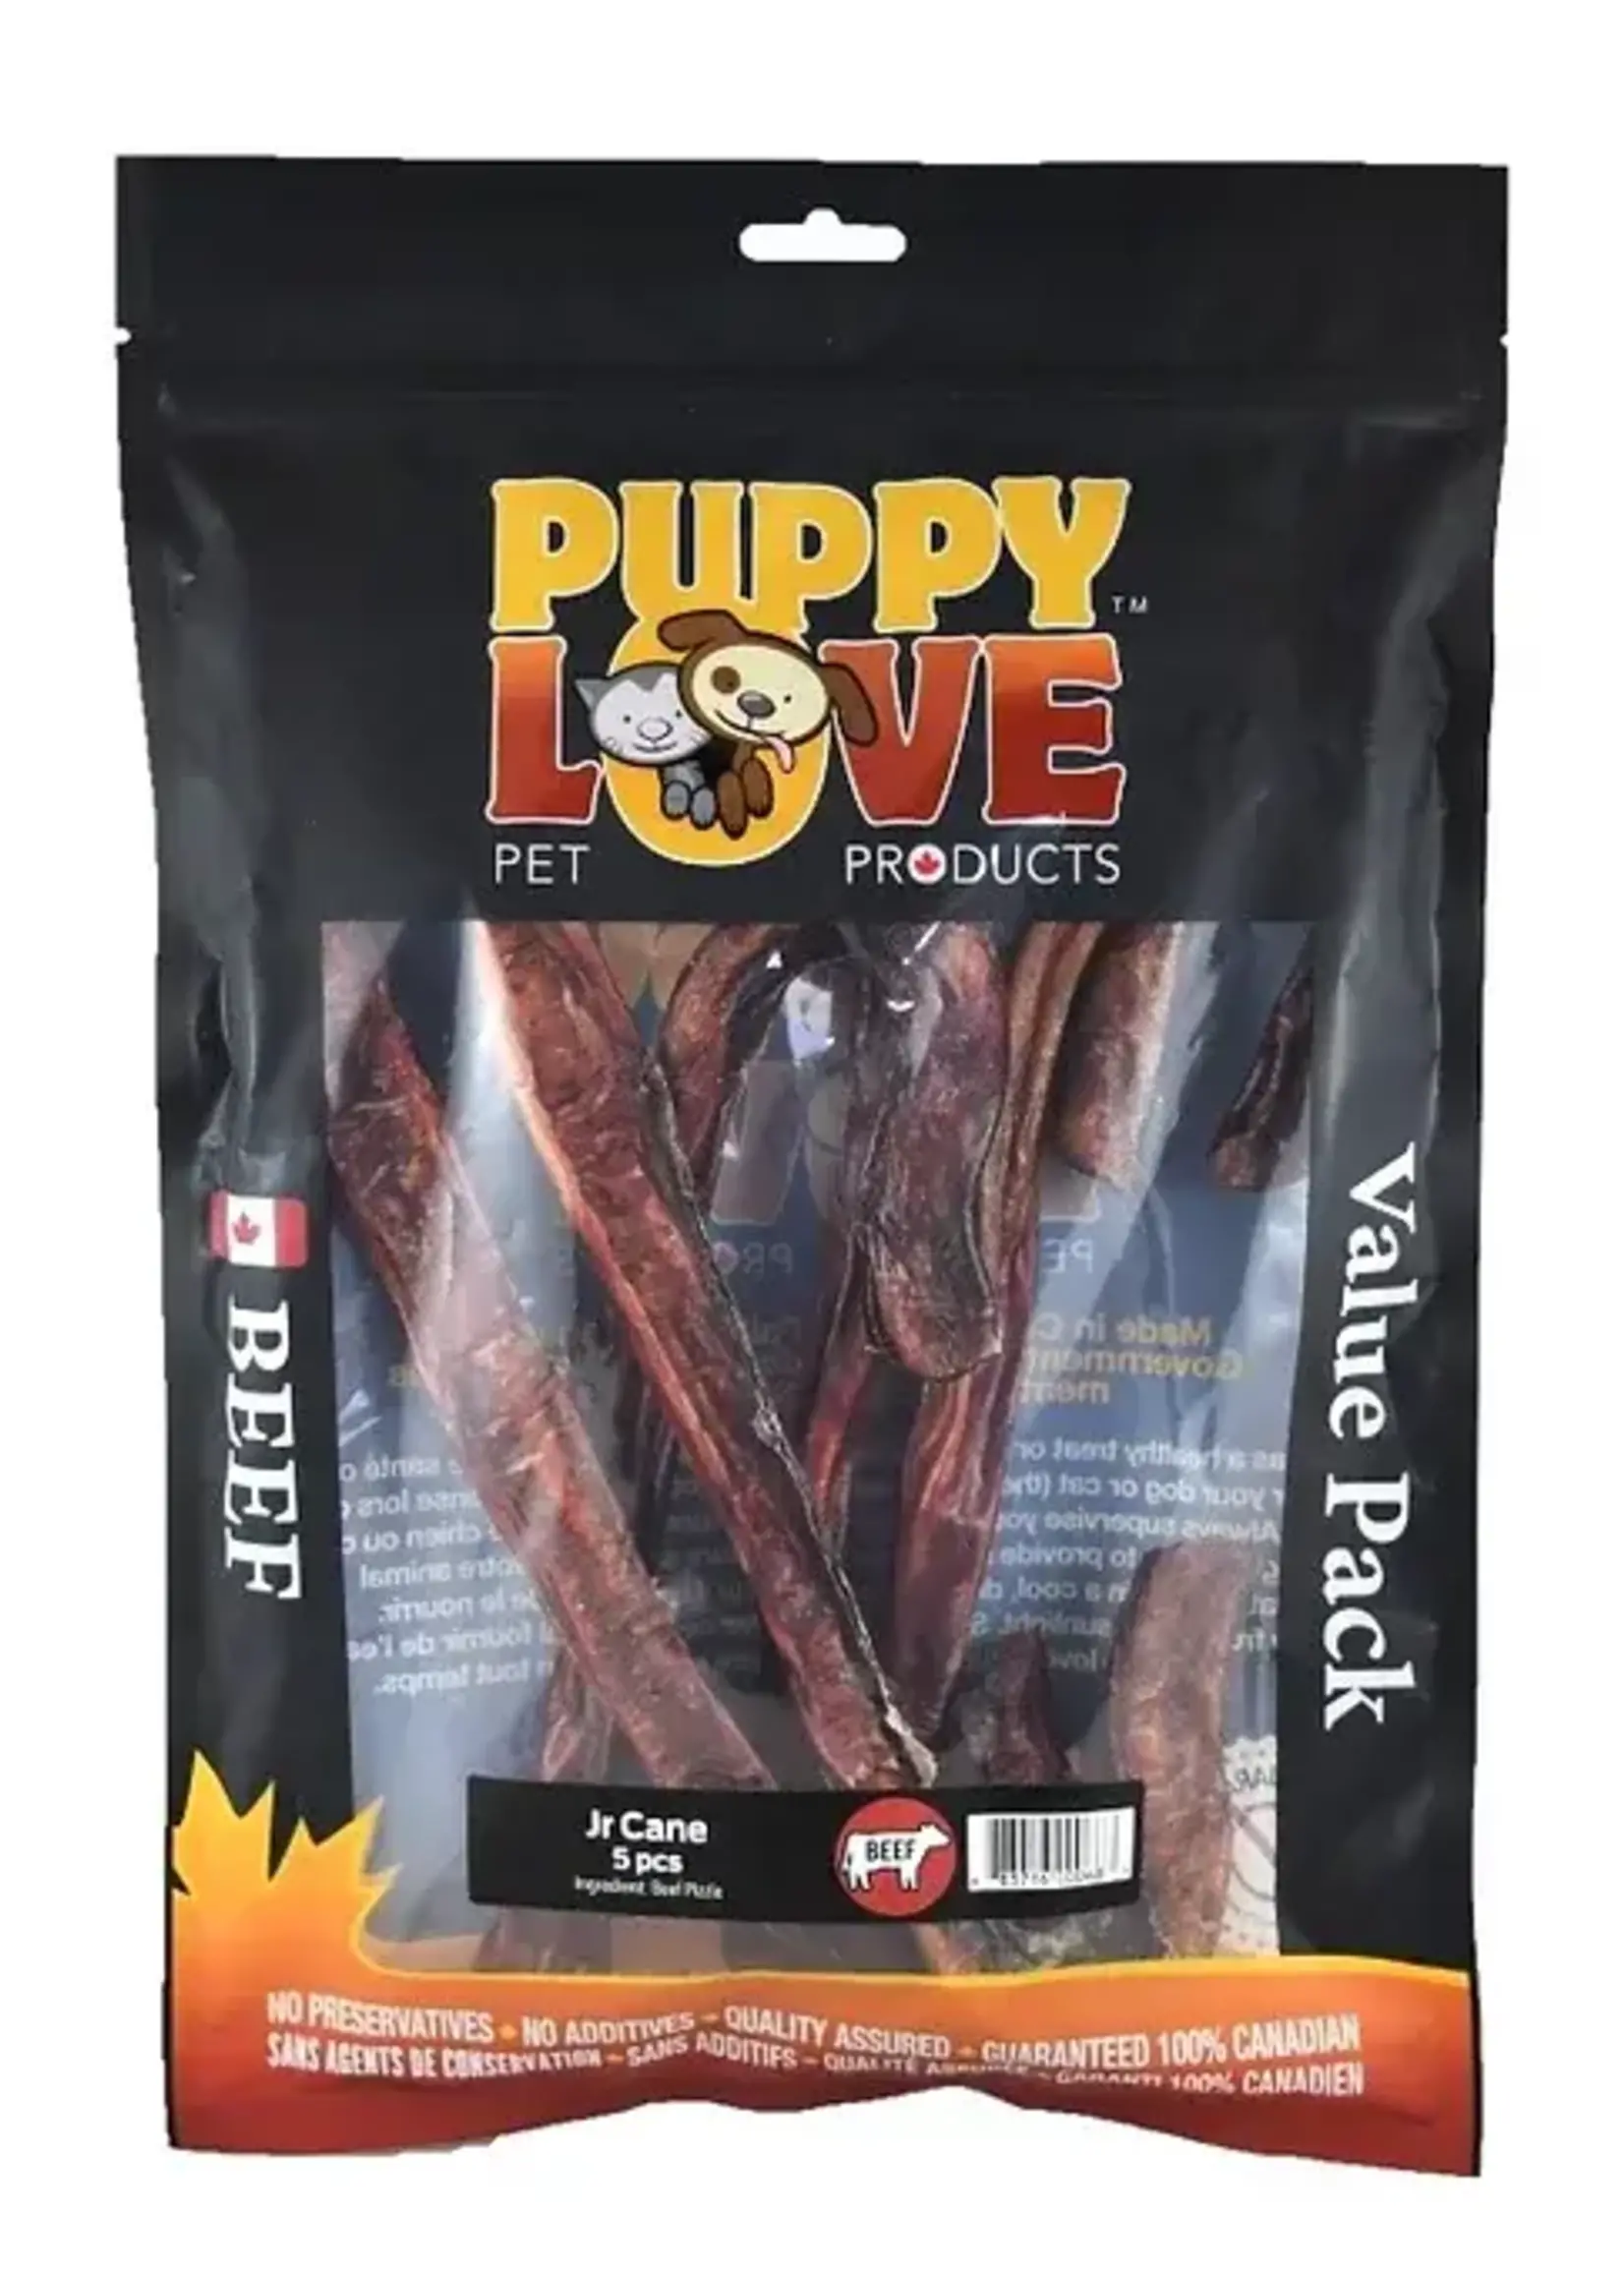 PUPPY LOVE PET PRODUCTS Puppy Love - Jr Cane - 5 Pack